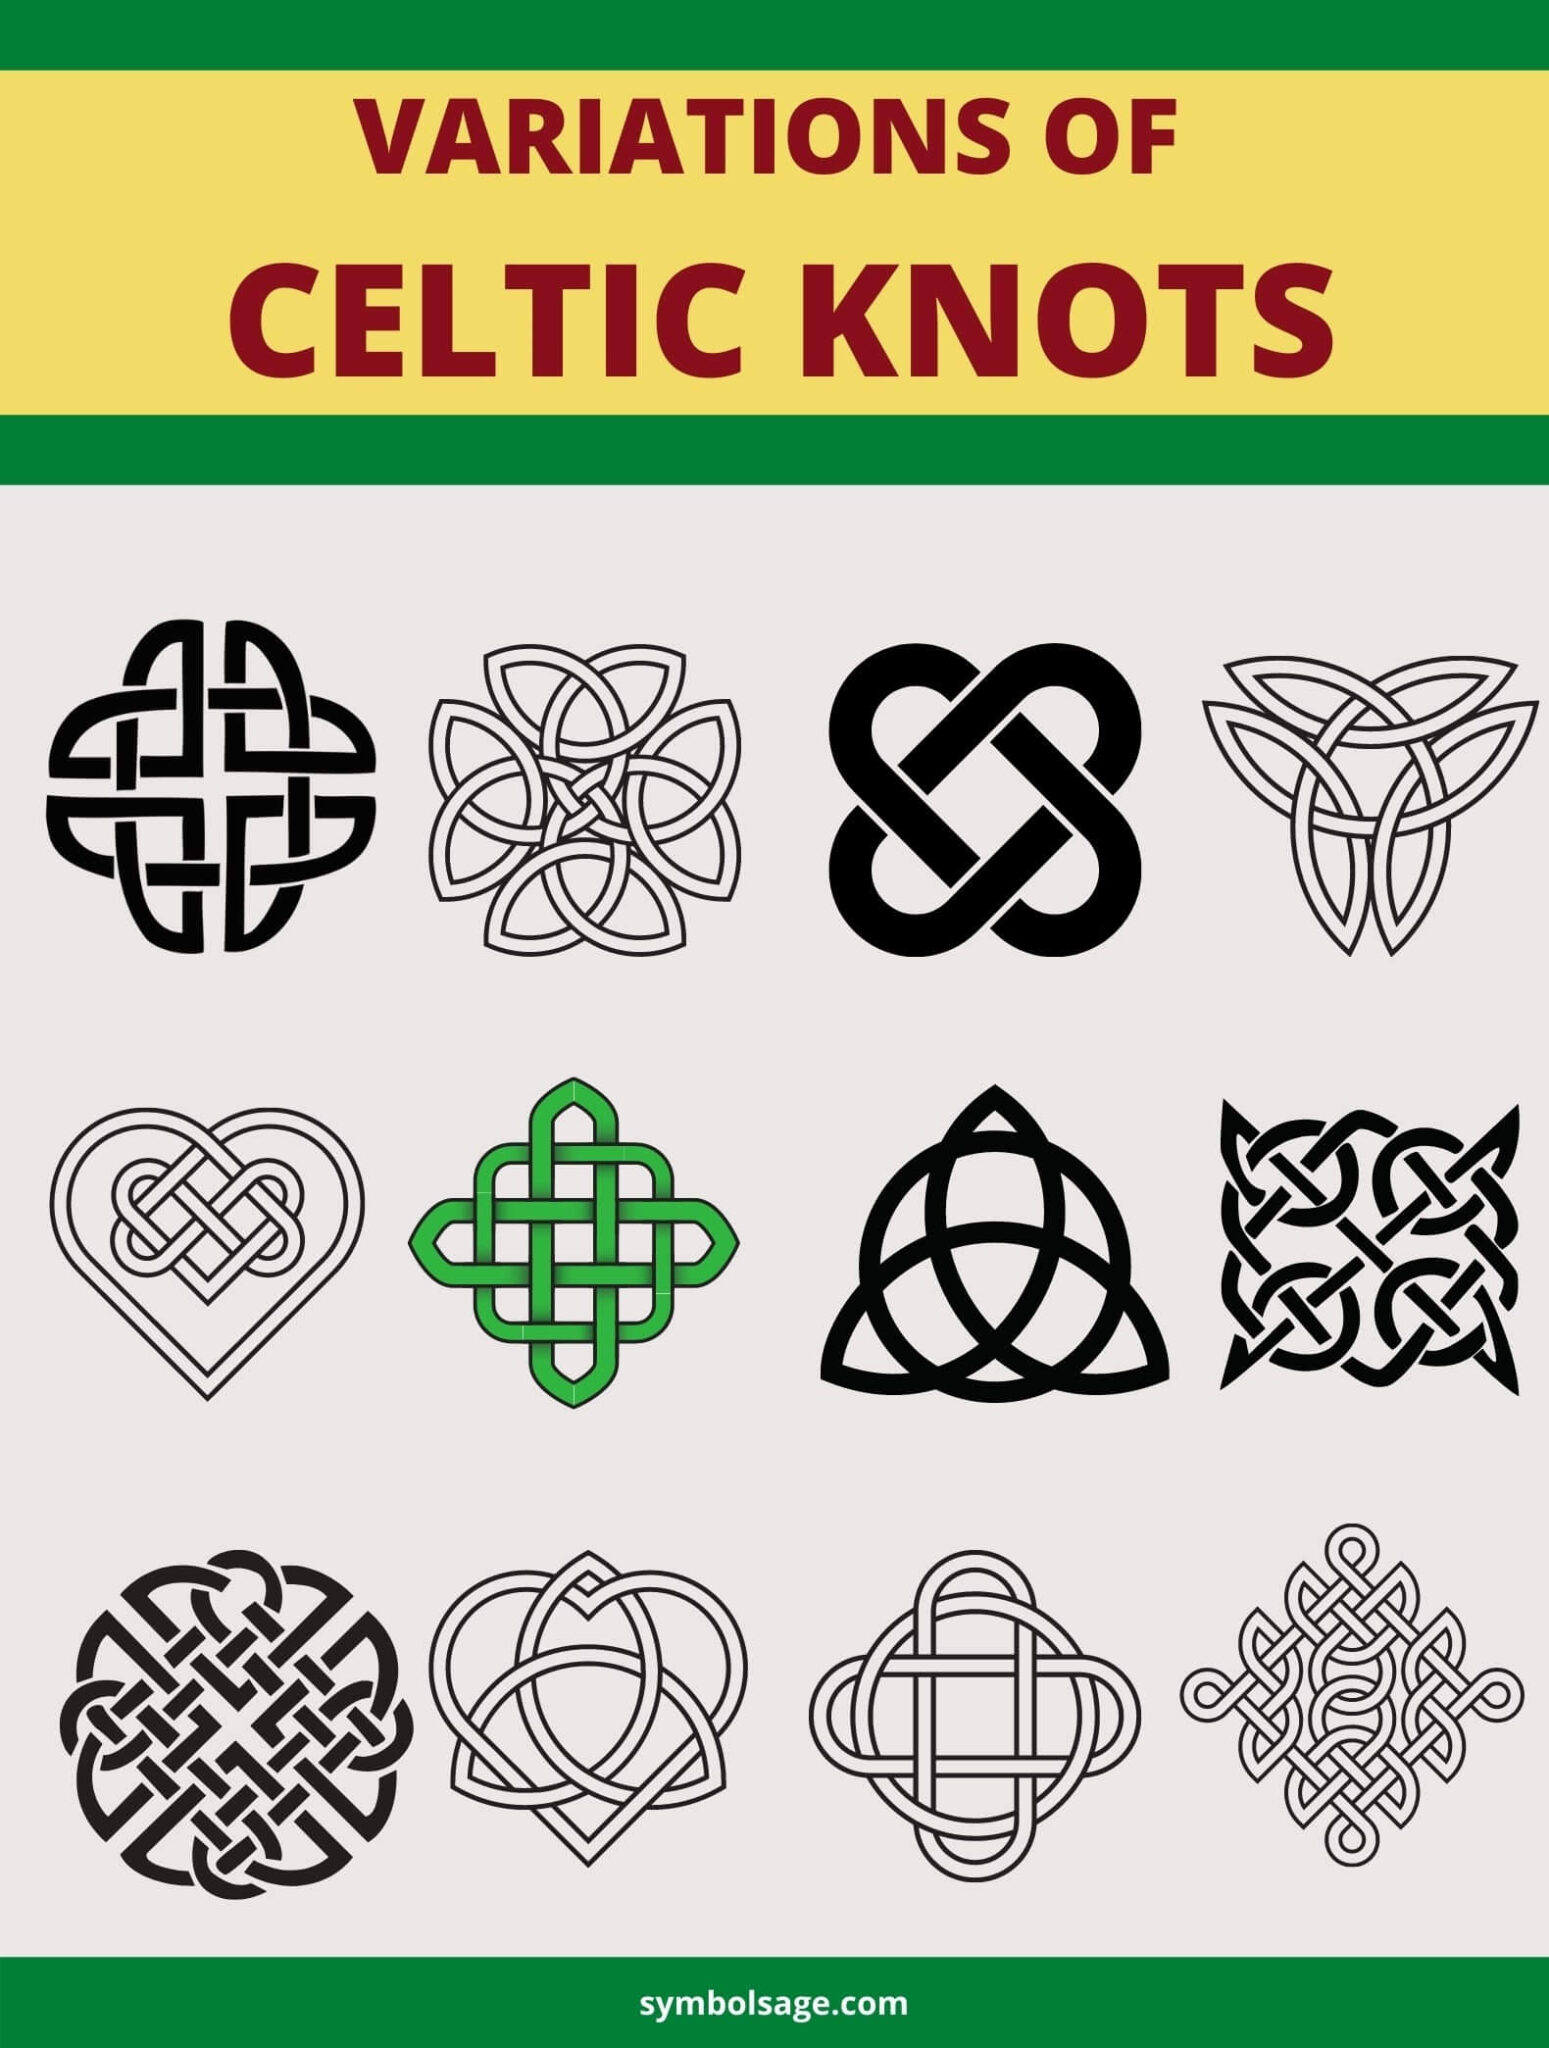 23-popular-celtic-symbols-and-their-meanings